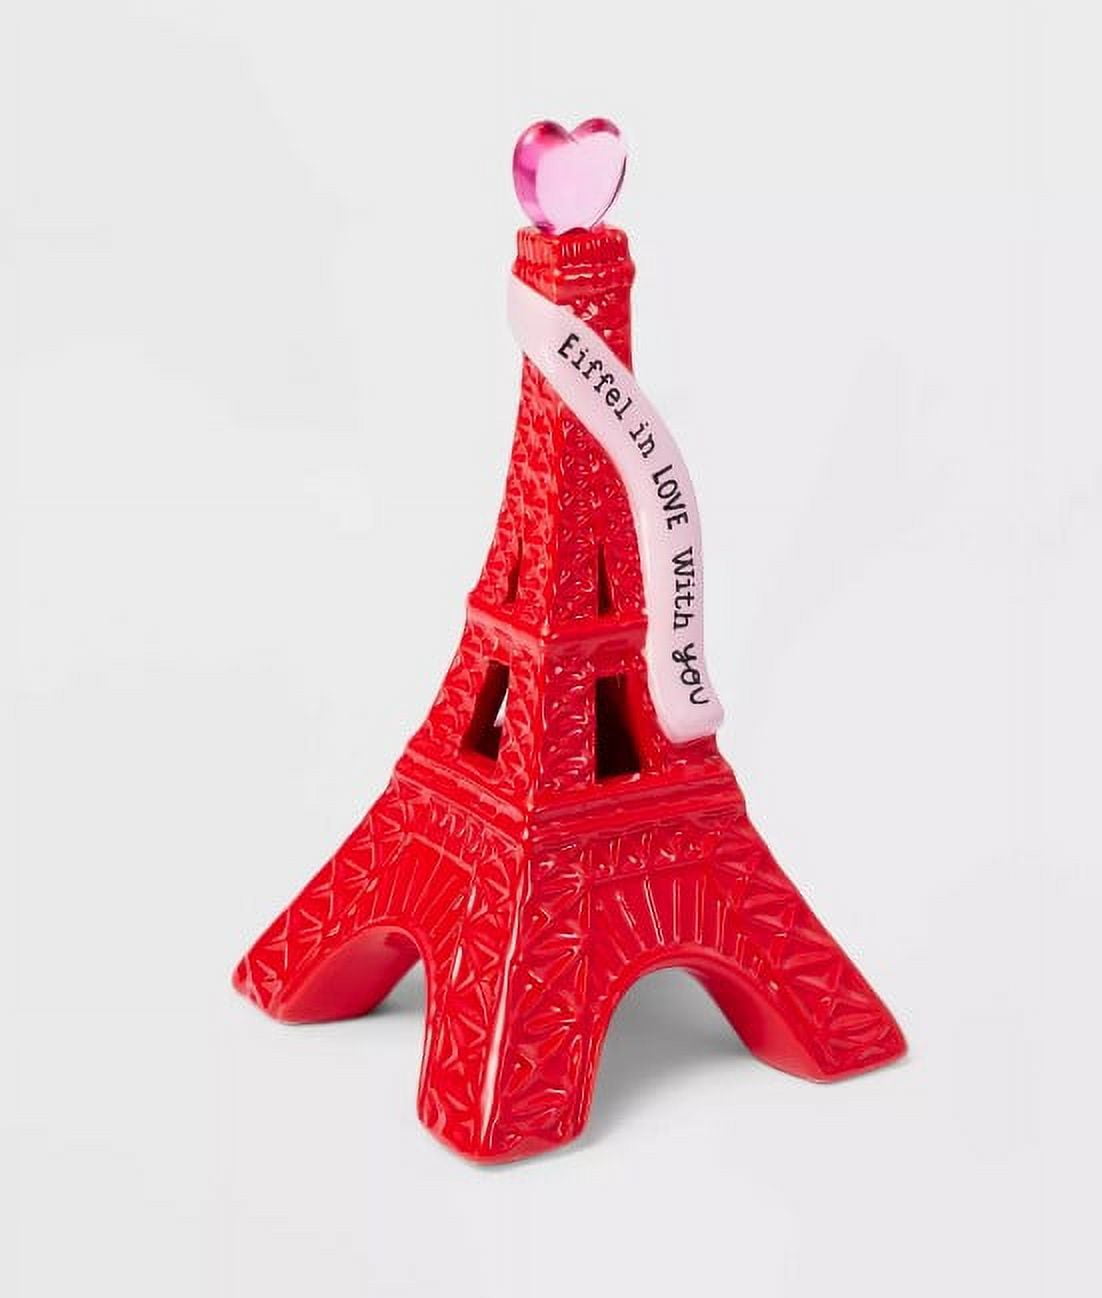 Skye Eiffel Tower Necklace Paris Je T'aime Travel Gifts - Quan Jewelry